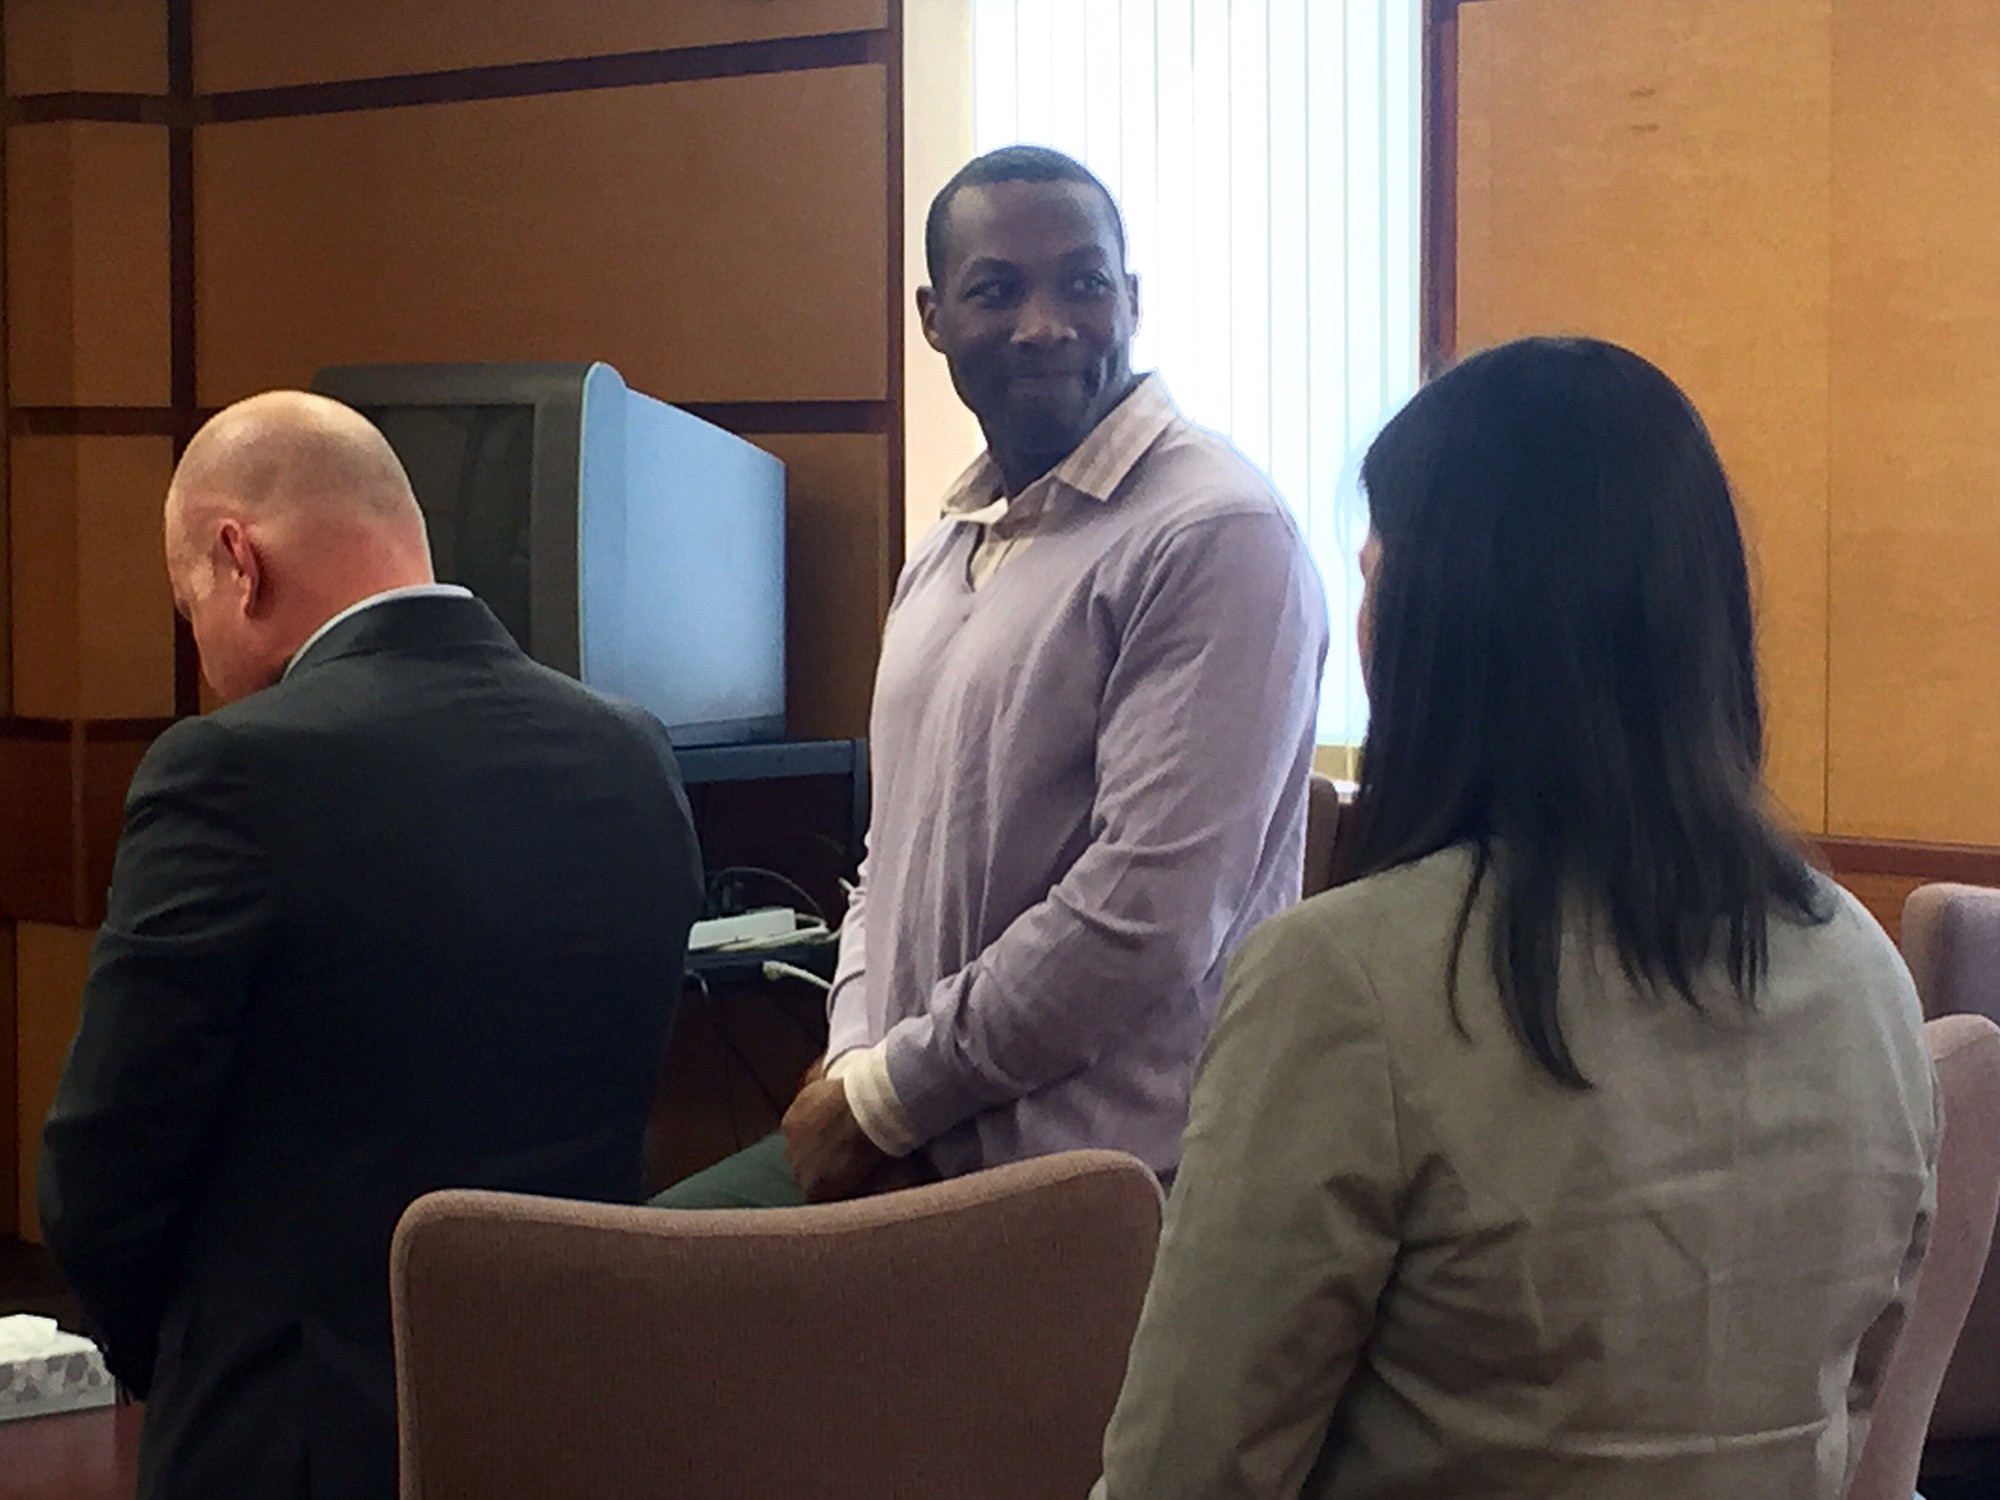 Christopher Warren turns and smiles at his family in Judge Robert Lewis' courtroom after a Clark County Superior Court jury found him not guilty of first-degree child rape.